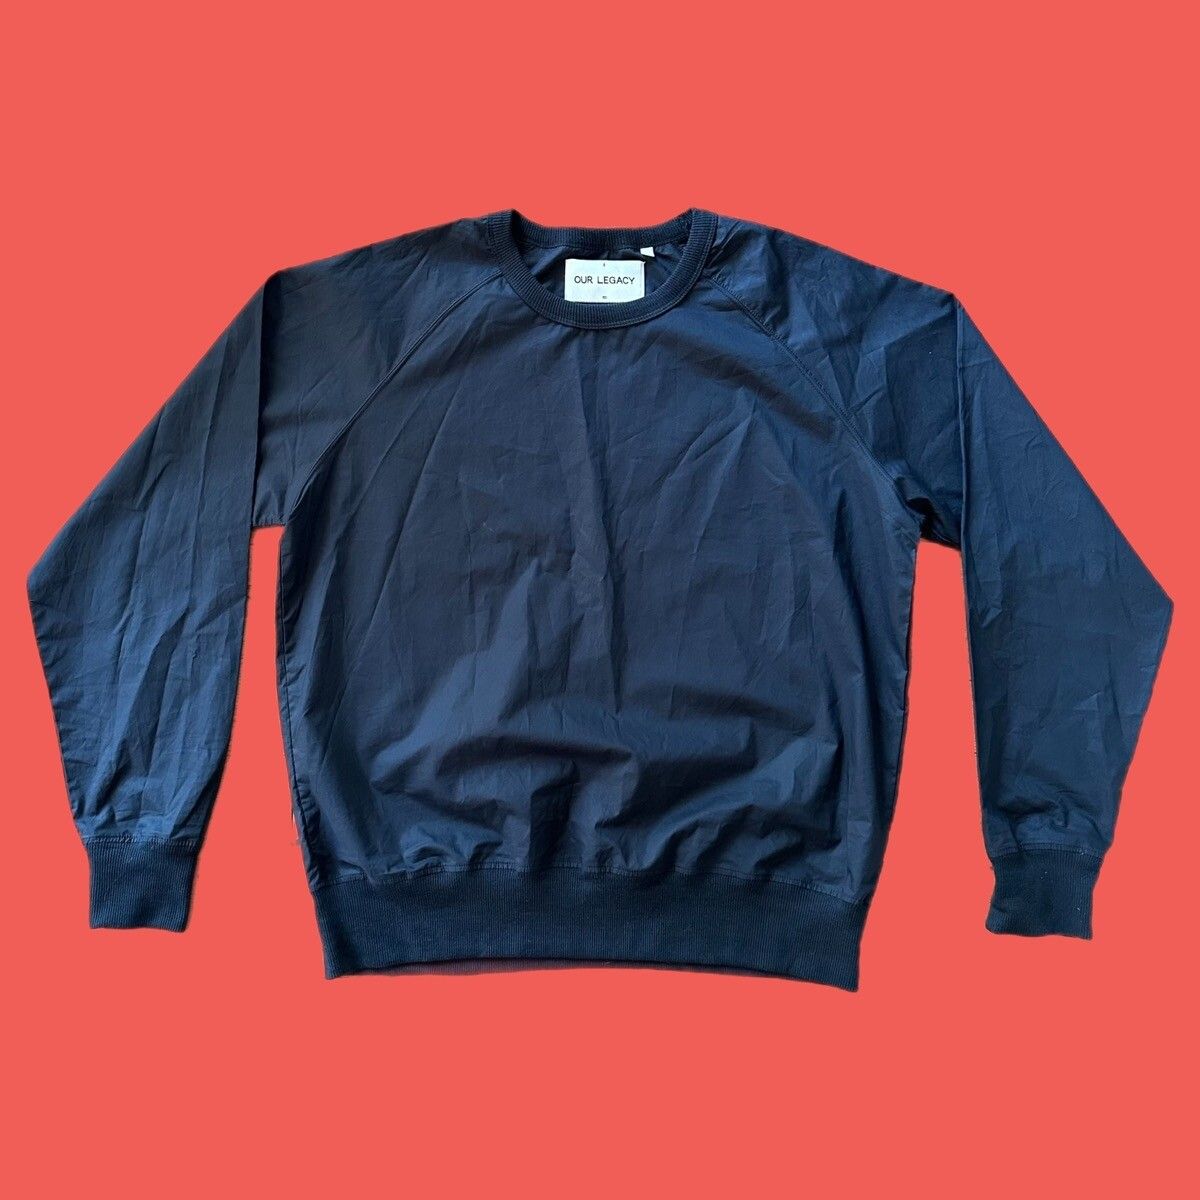 Our Legacy Our Legacy SS15 Navy Crewneck Size US M / EU 48-50 / 2 - 1 Preview